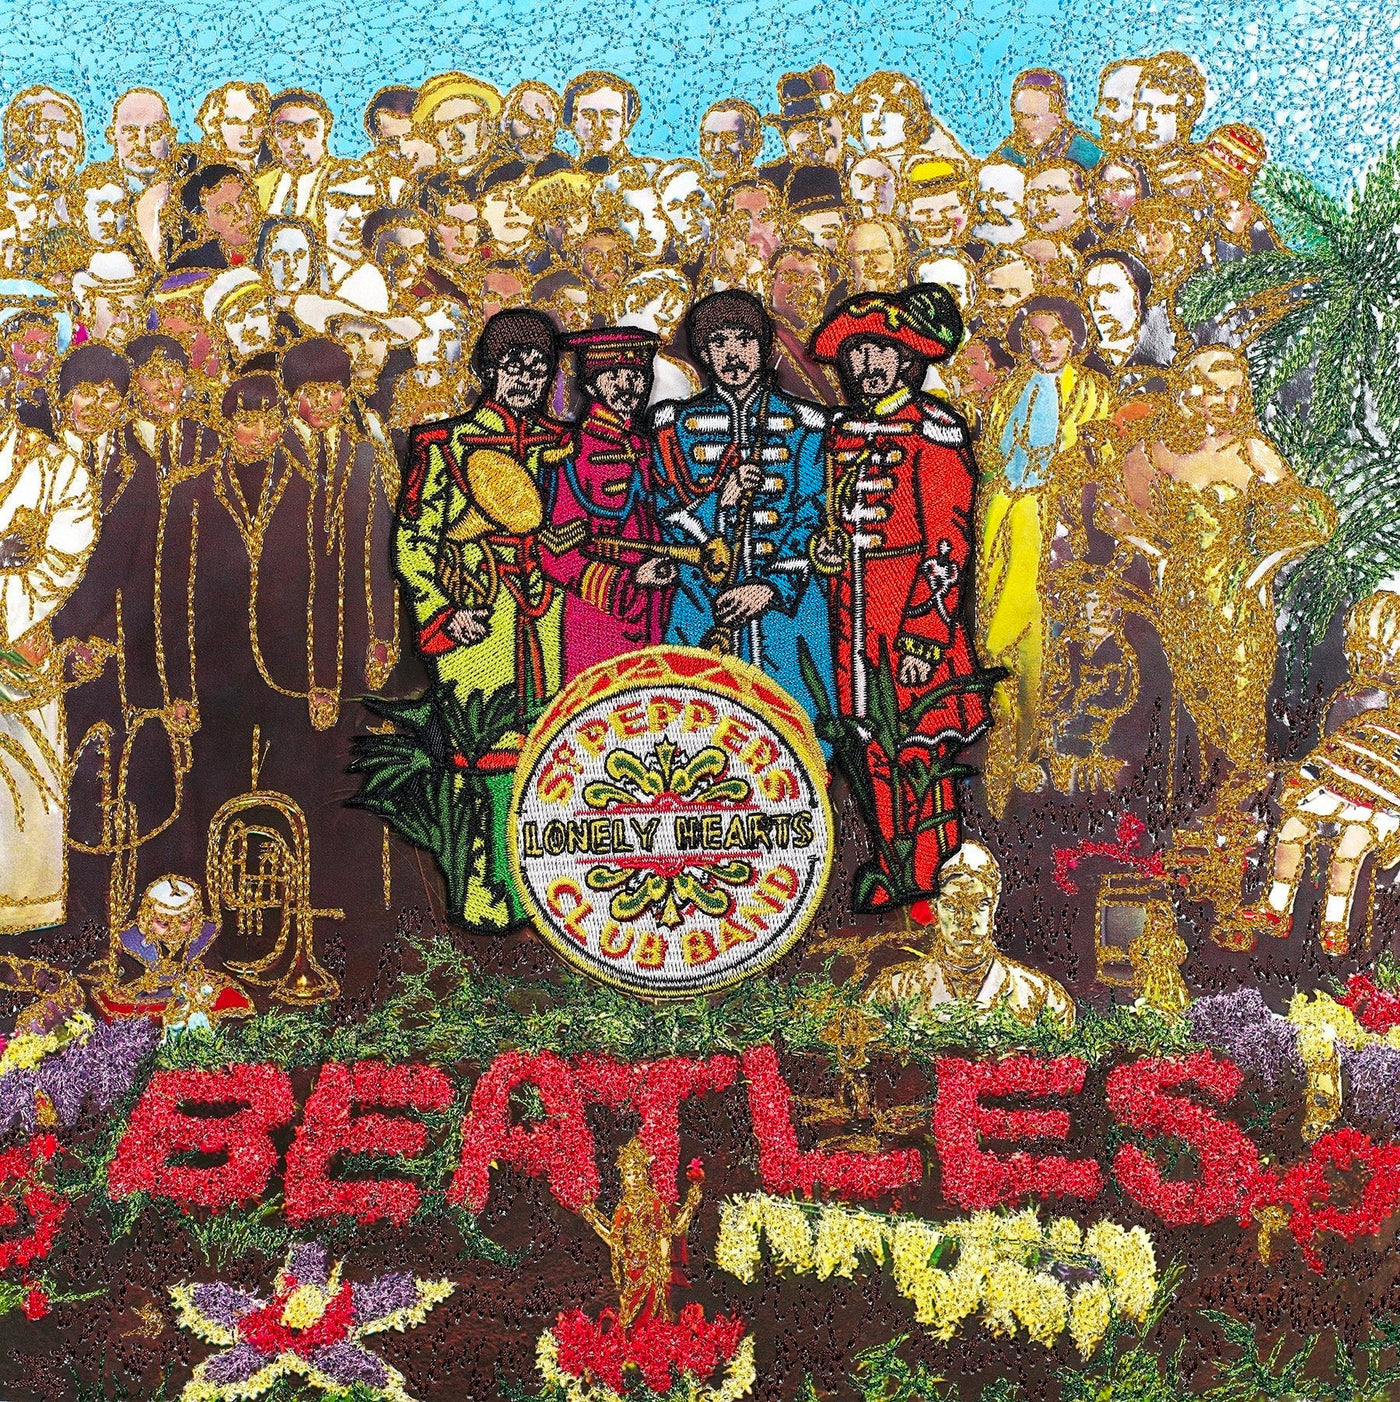 Sgt Pepper's Lonely Hearts Club Band - The Beatles